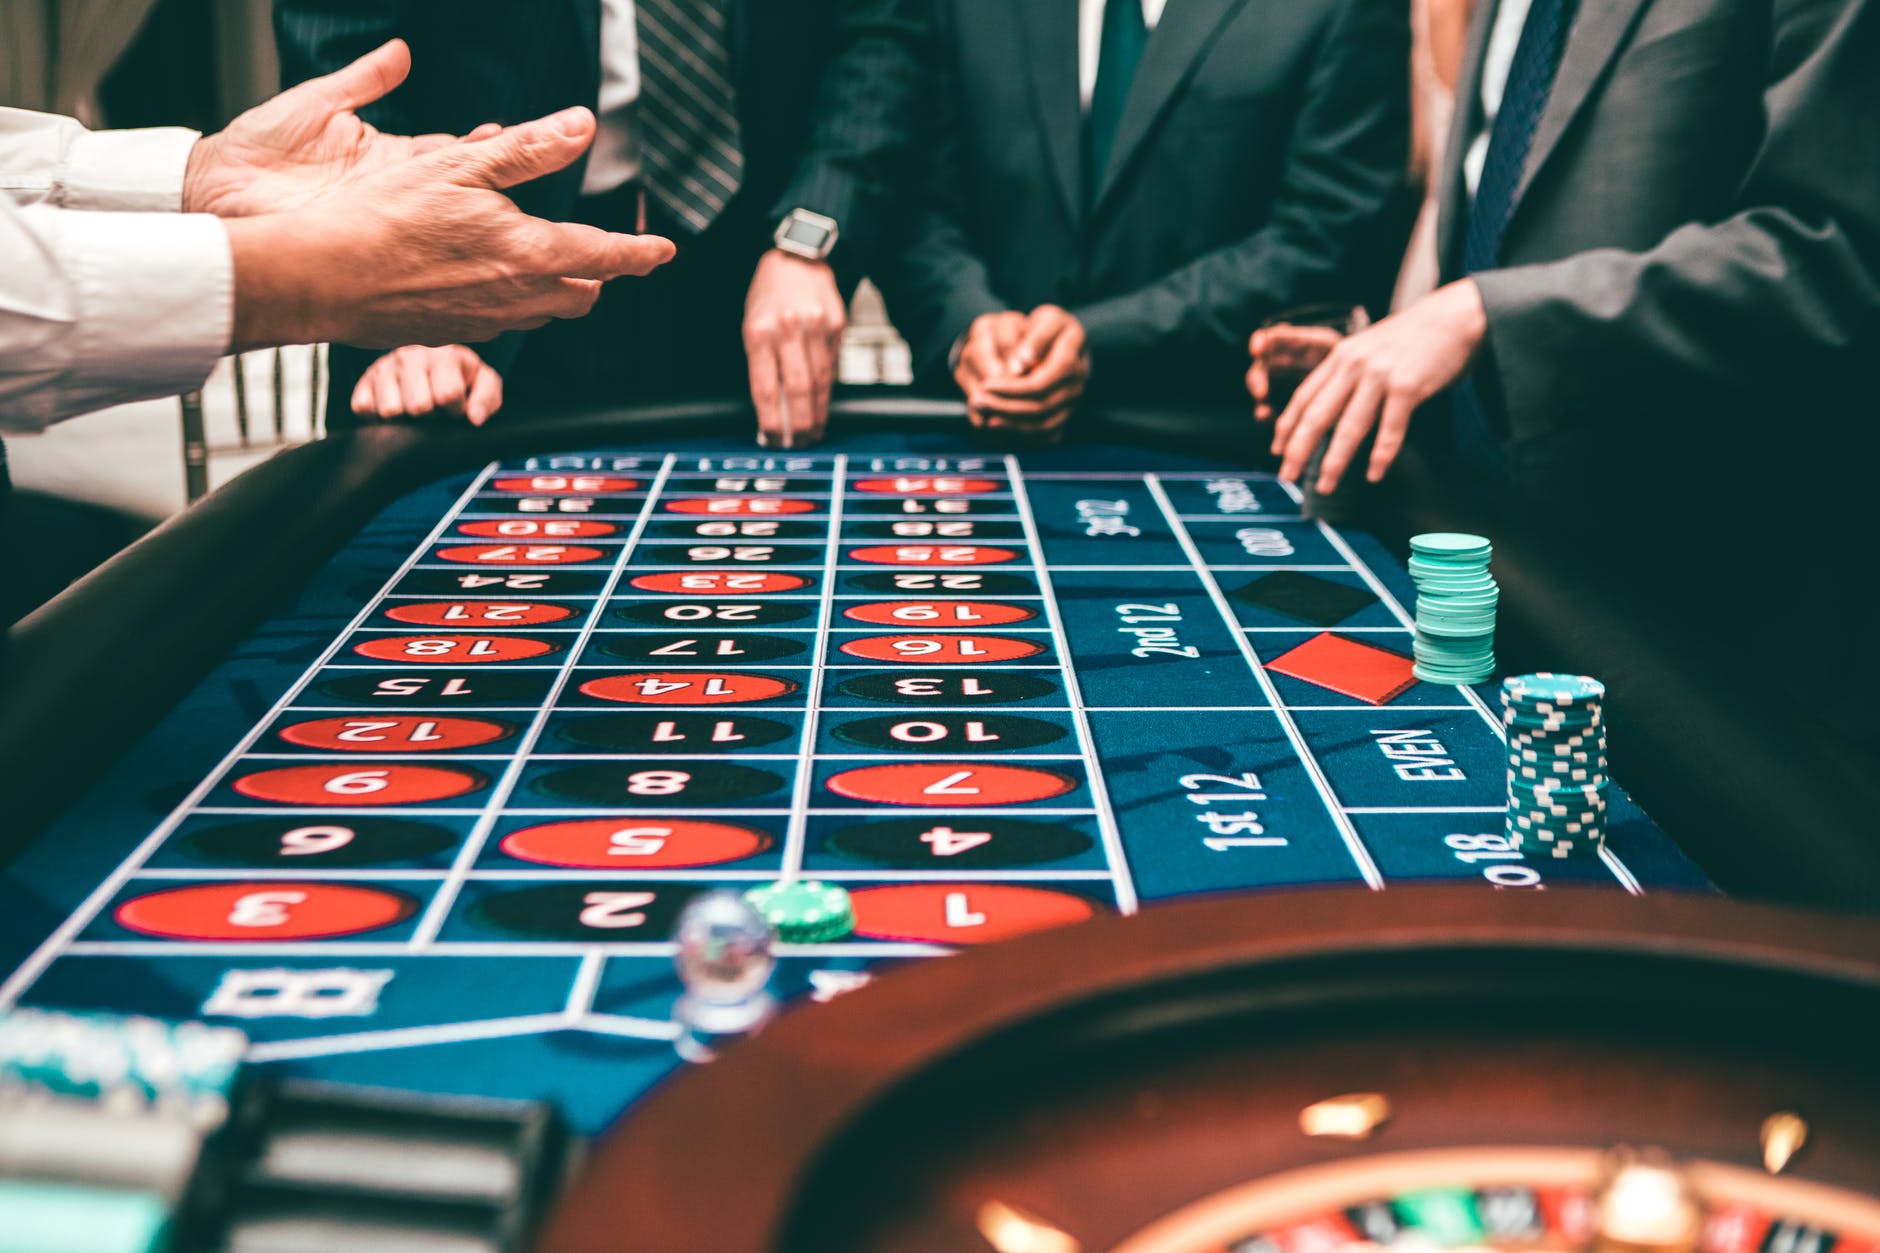 How to Find Trusted Casinos 7 Tips from Experts